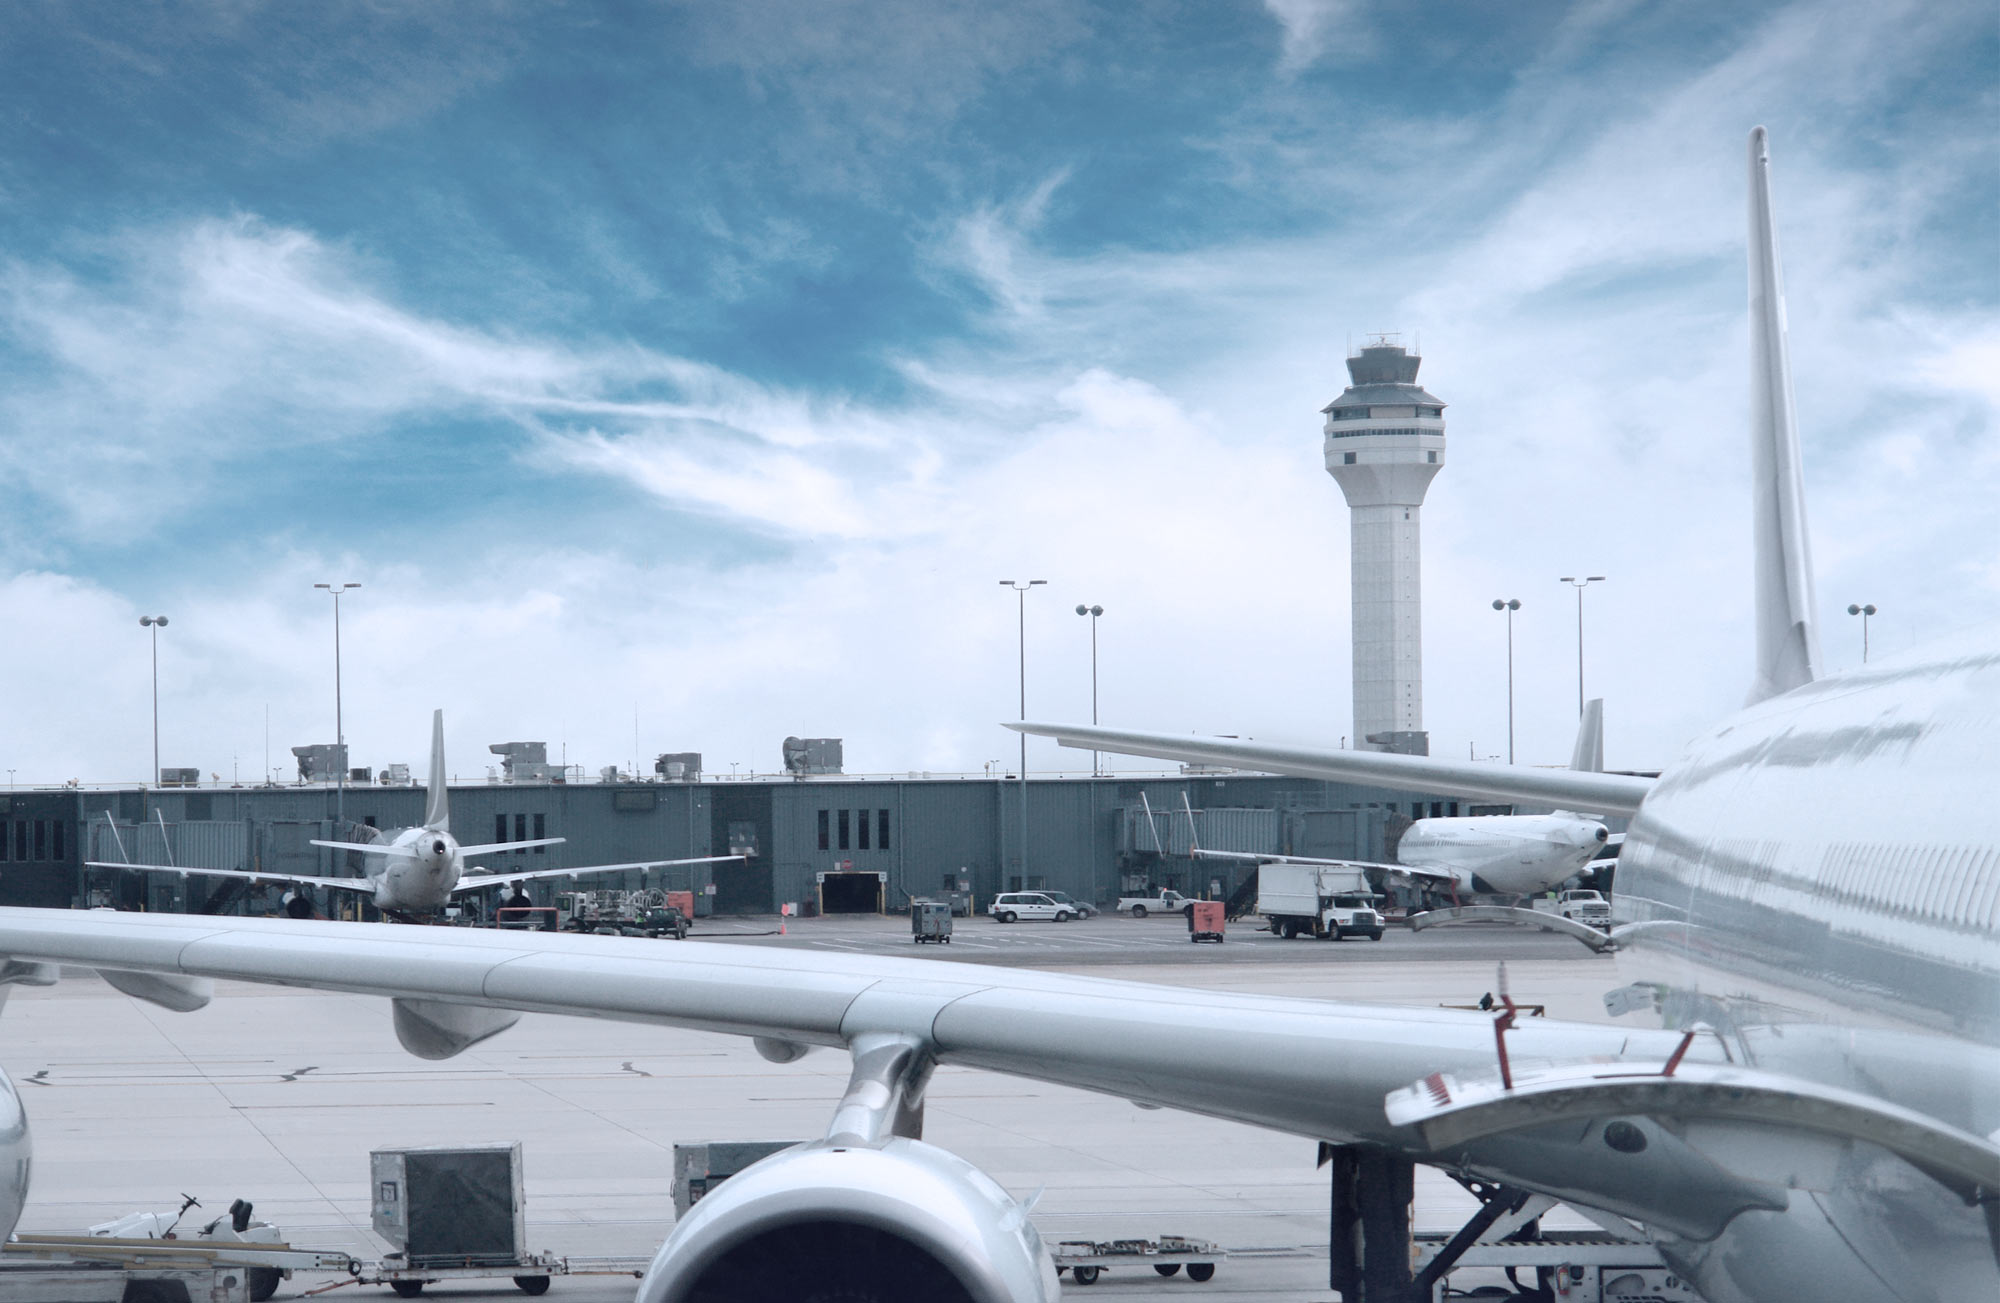 Airport airside header picture, showing an airport